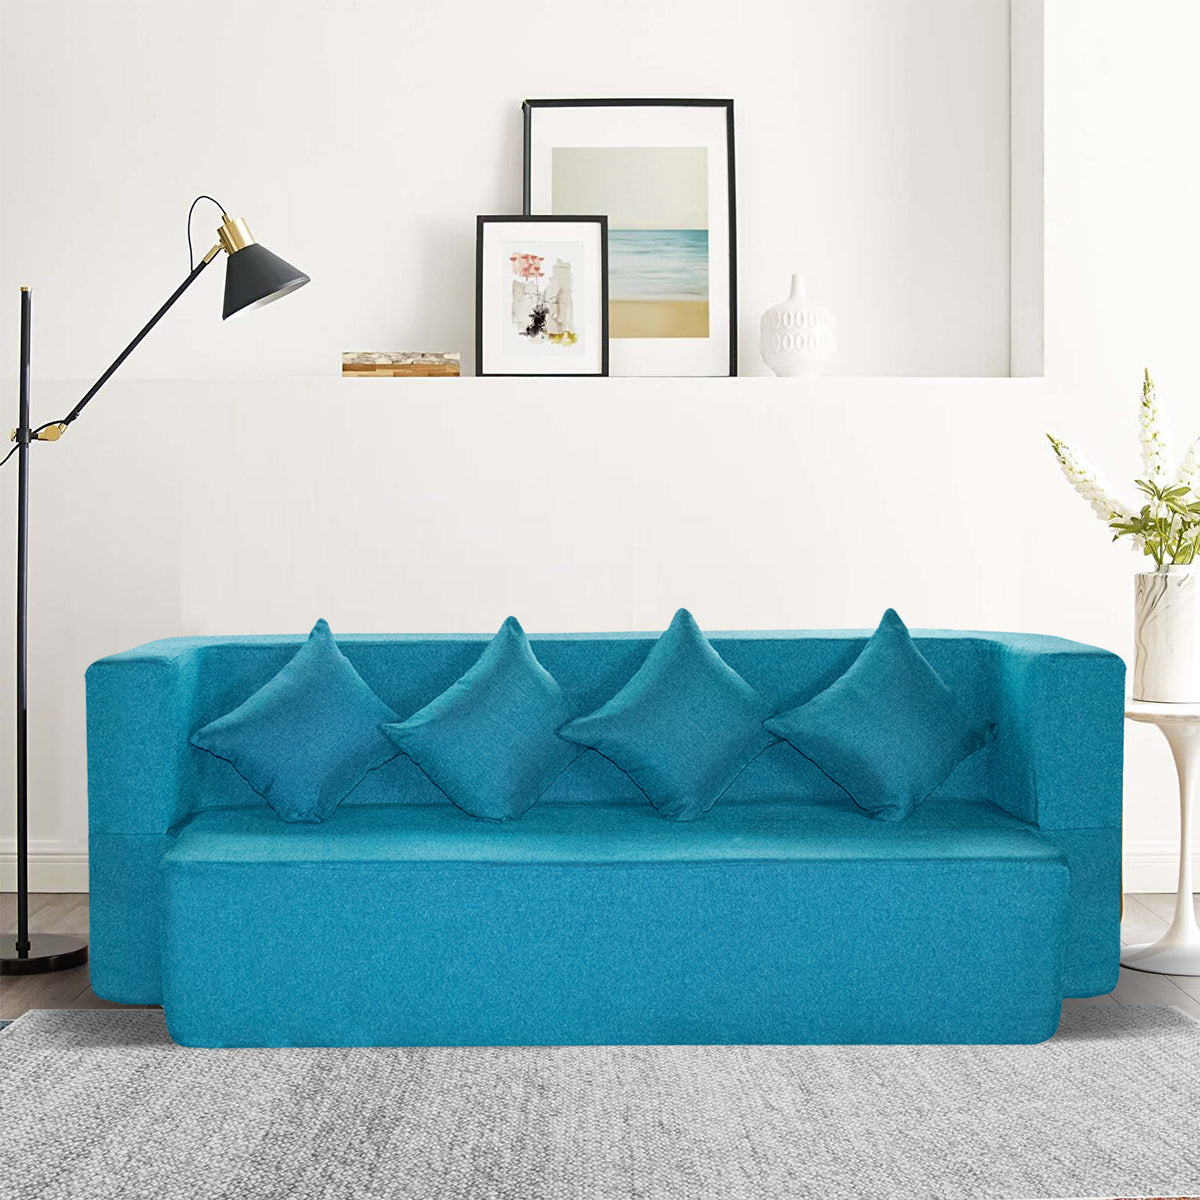 Cover of Blue Jute Fabric (78"x44"x14") FlipperX Sofa cum Bed with 4 Plain Cushion Covers